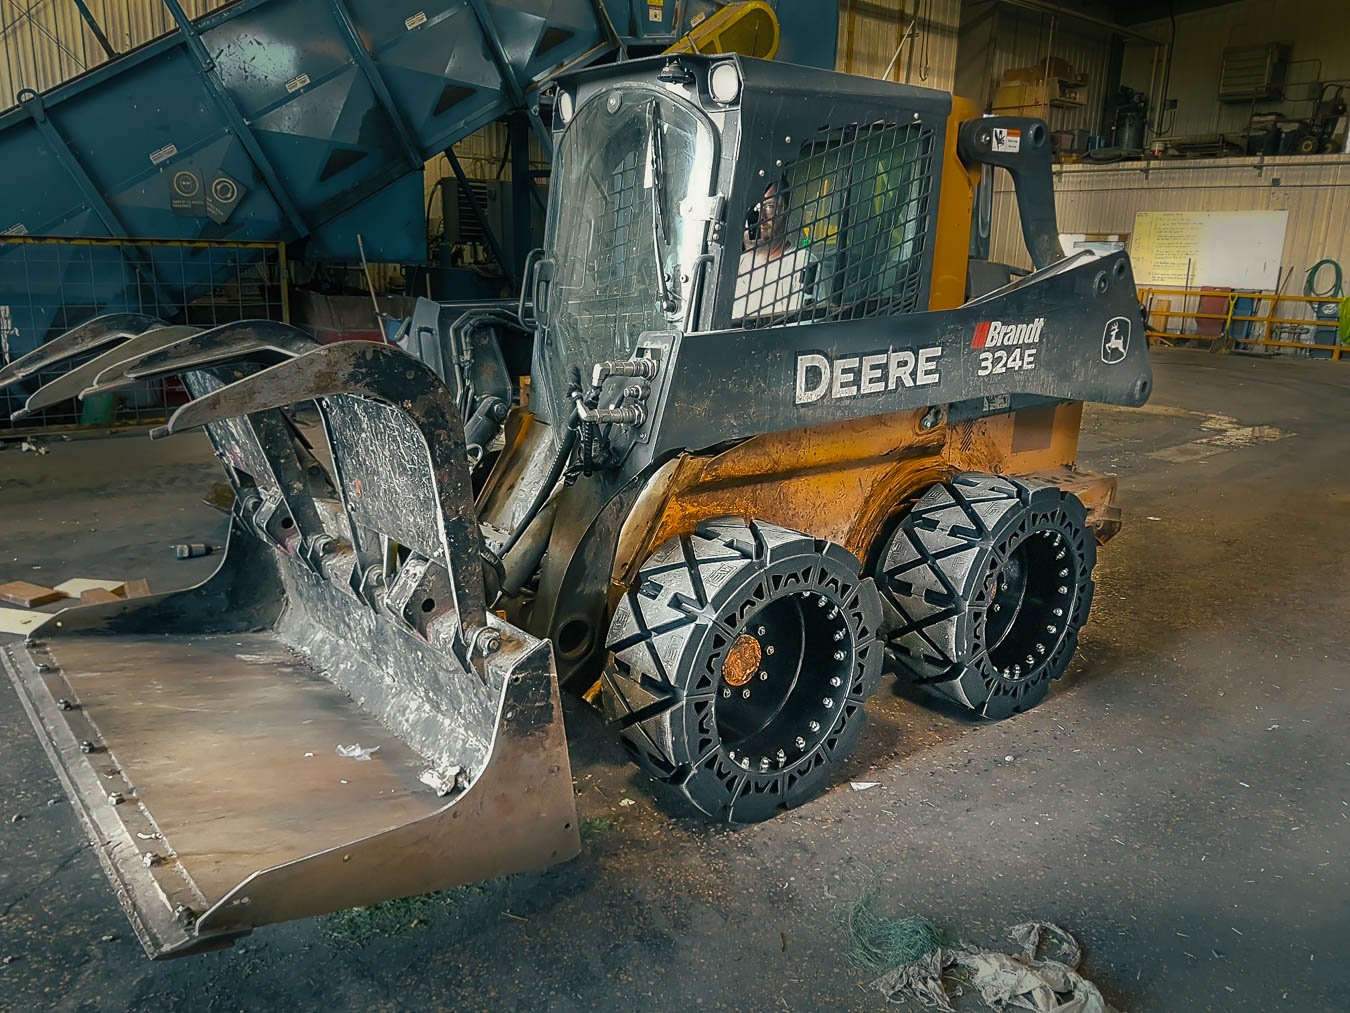 This image shows a DEERE 324E with our skid steer tires the EWRS-HS